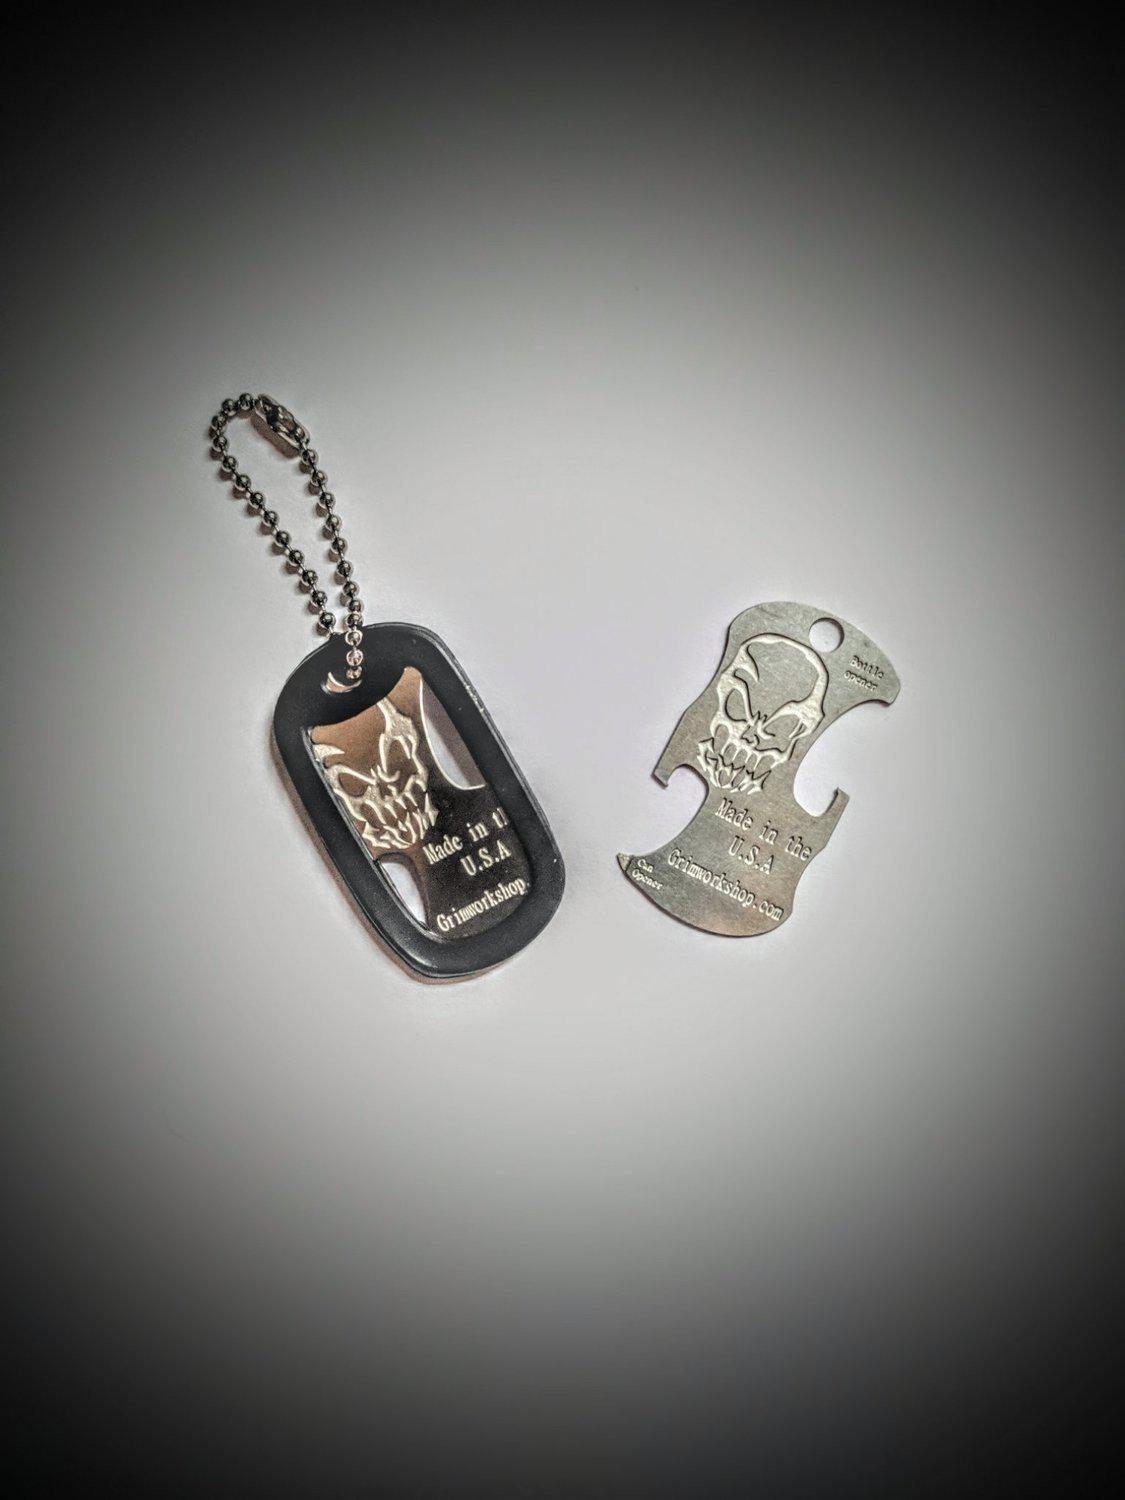 dog tag bottle opener necklace. This can opener bottle opener combo for everyday carry or mess kits!